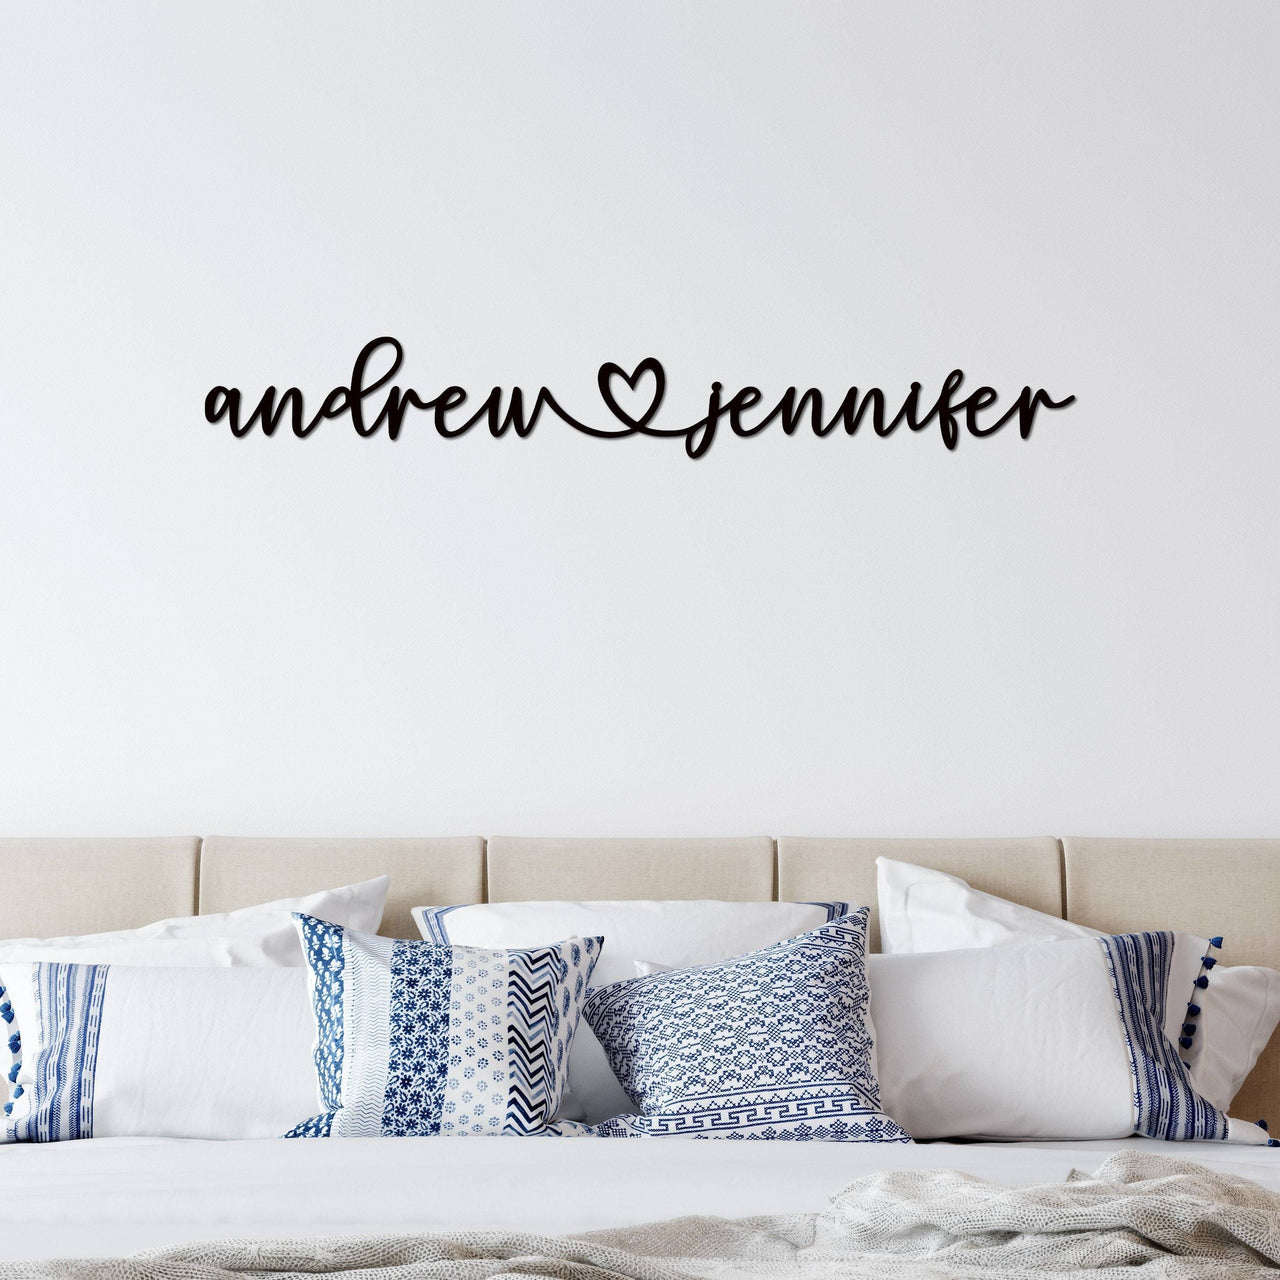 Names Above Bed Metal Sign | Personalized First Names with Heart in Between I Heart You Customized Metal Sign | Newlywed Gift | Wedding Sign